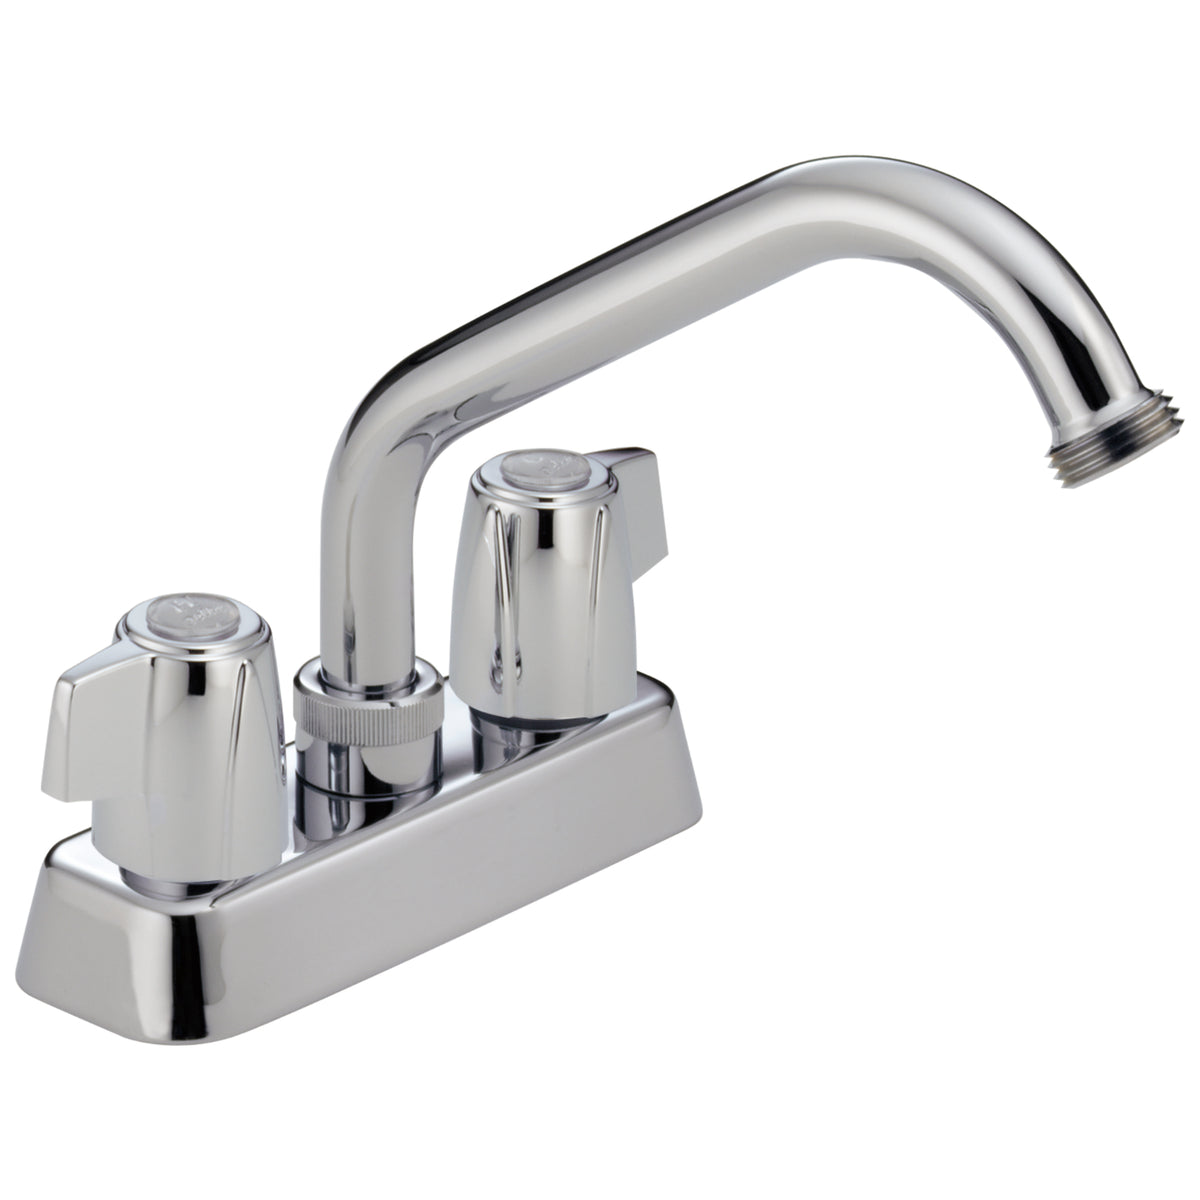 Peerless P299232 Two Handle Laundry Faucet, Chrome